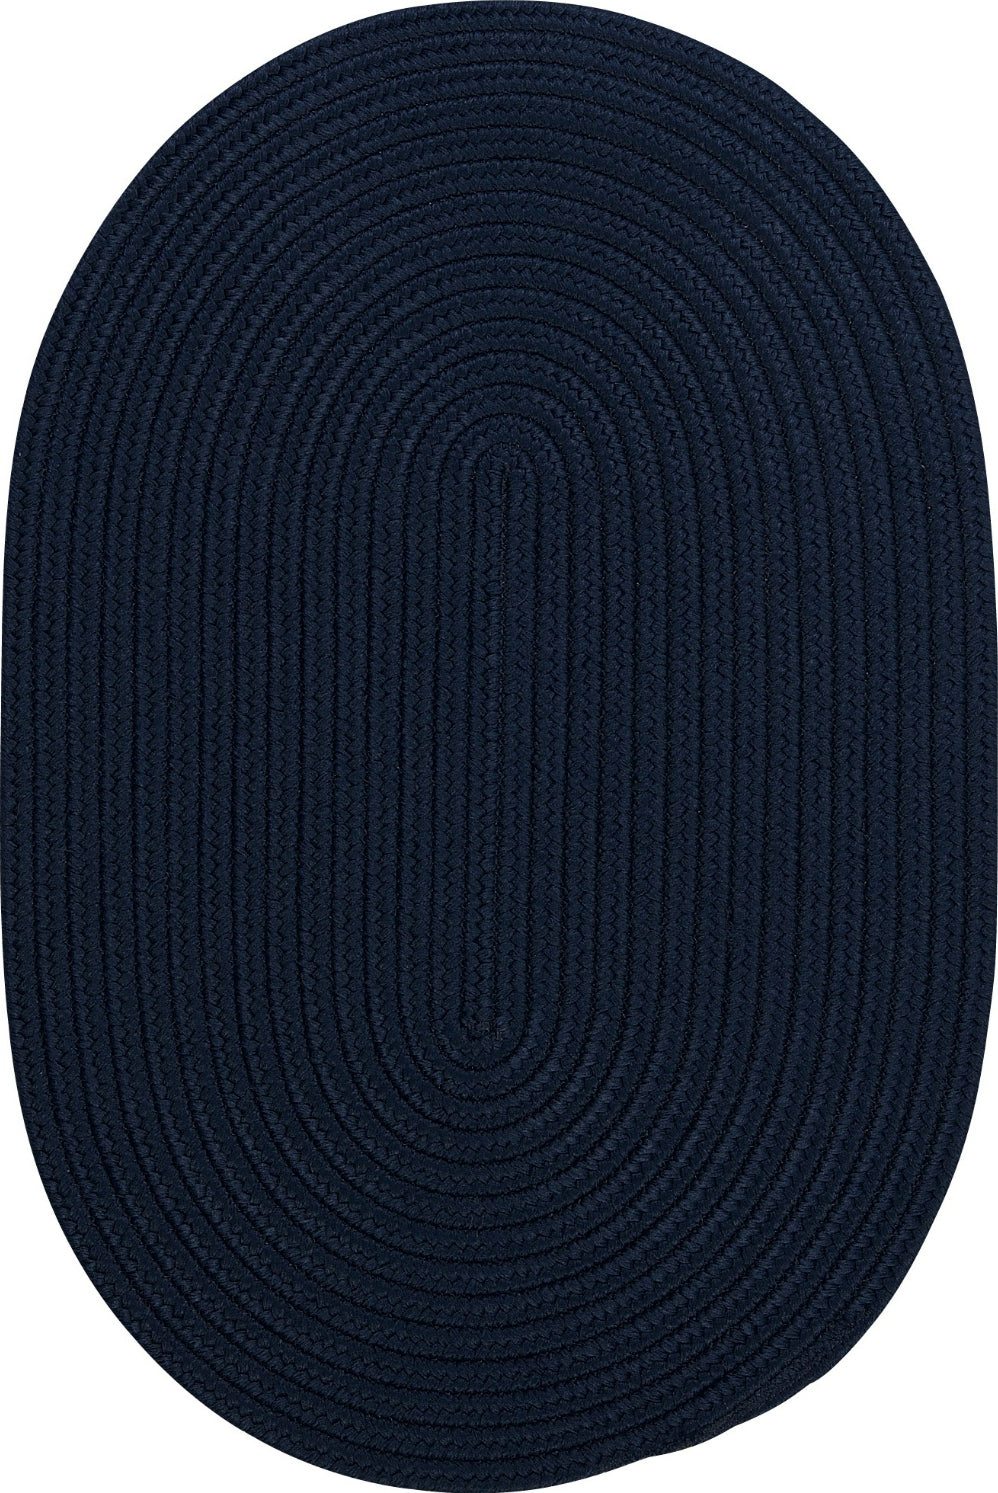 Colonial Mills Port Royale PO52 Navy Area Rug